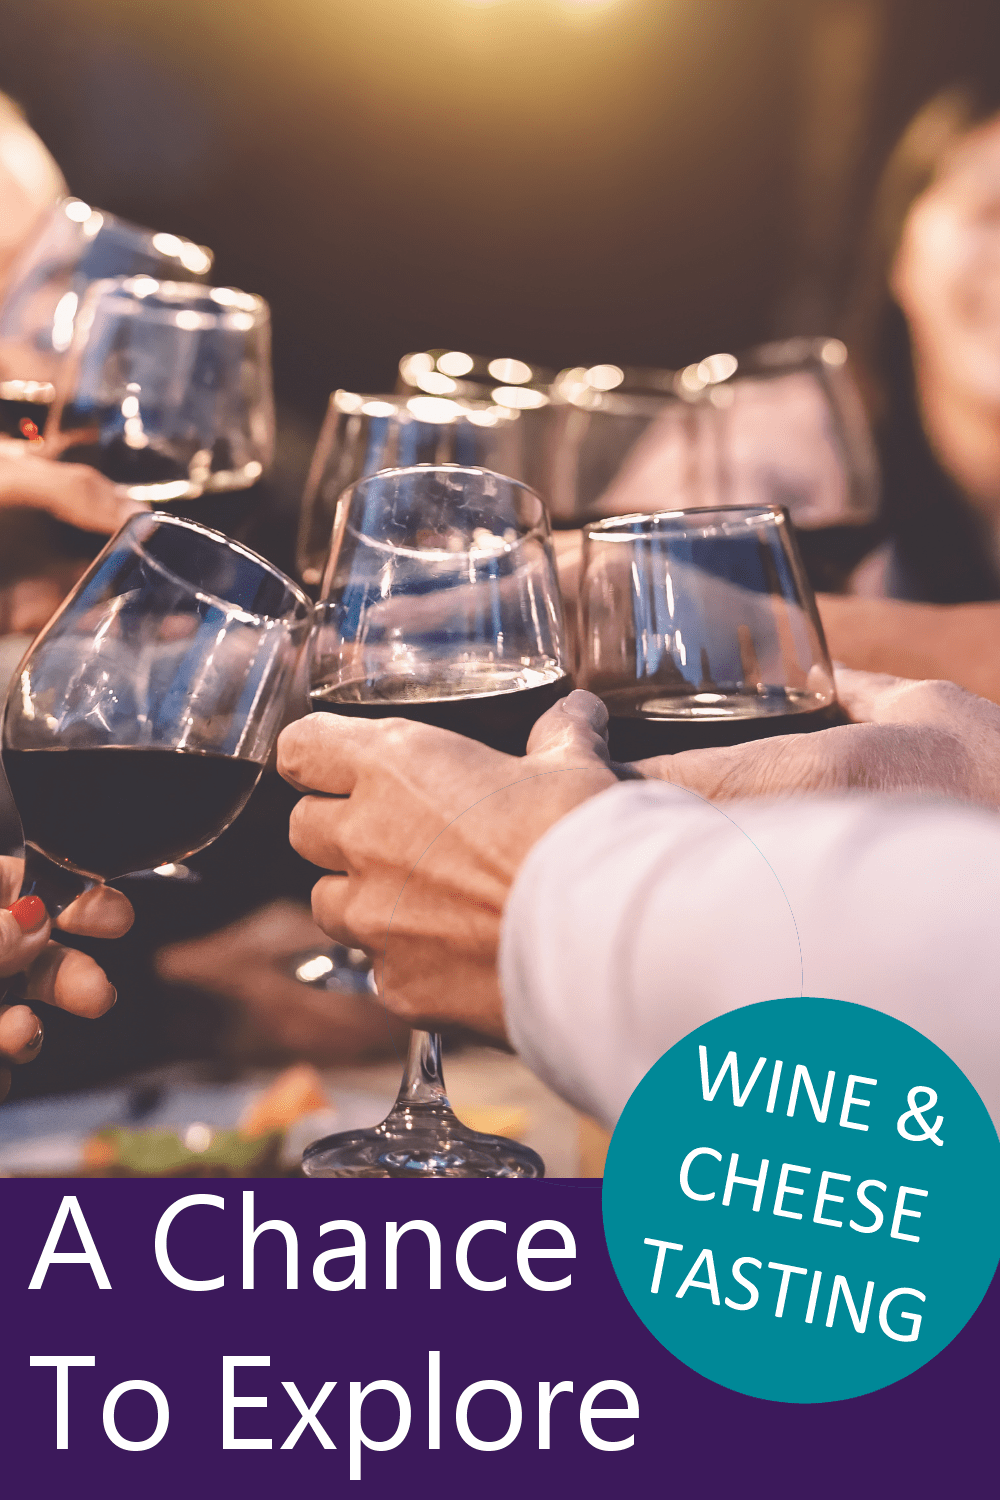 Novel Wines Event Wine & Cheese Tasting at the Novel Wines Bar in Bath, on Friday 29 March at 7PM